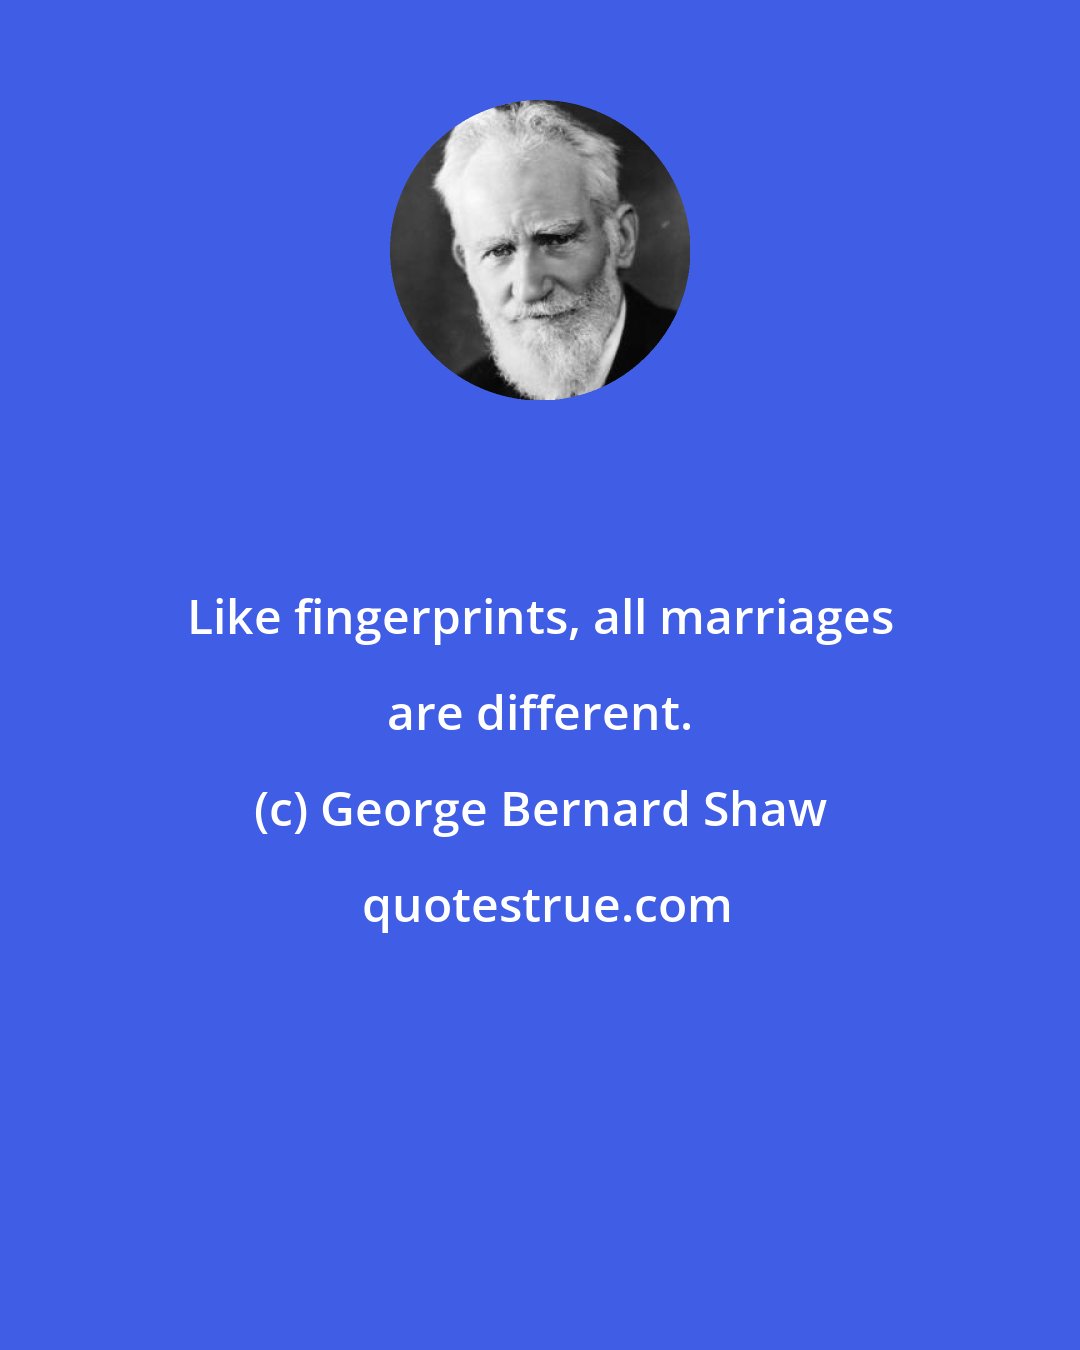 George Bernard Shaw: Like fingerprints, all marriages are different.